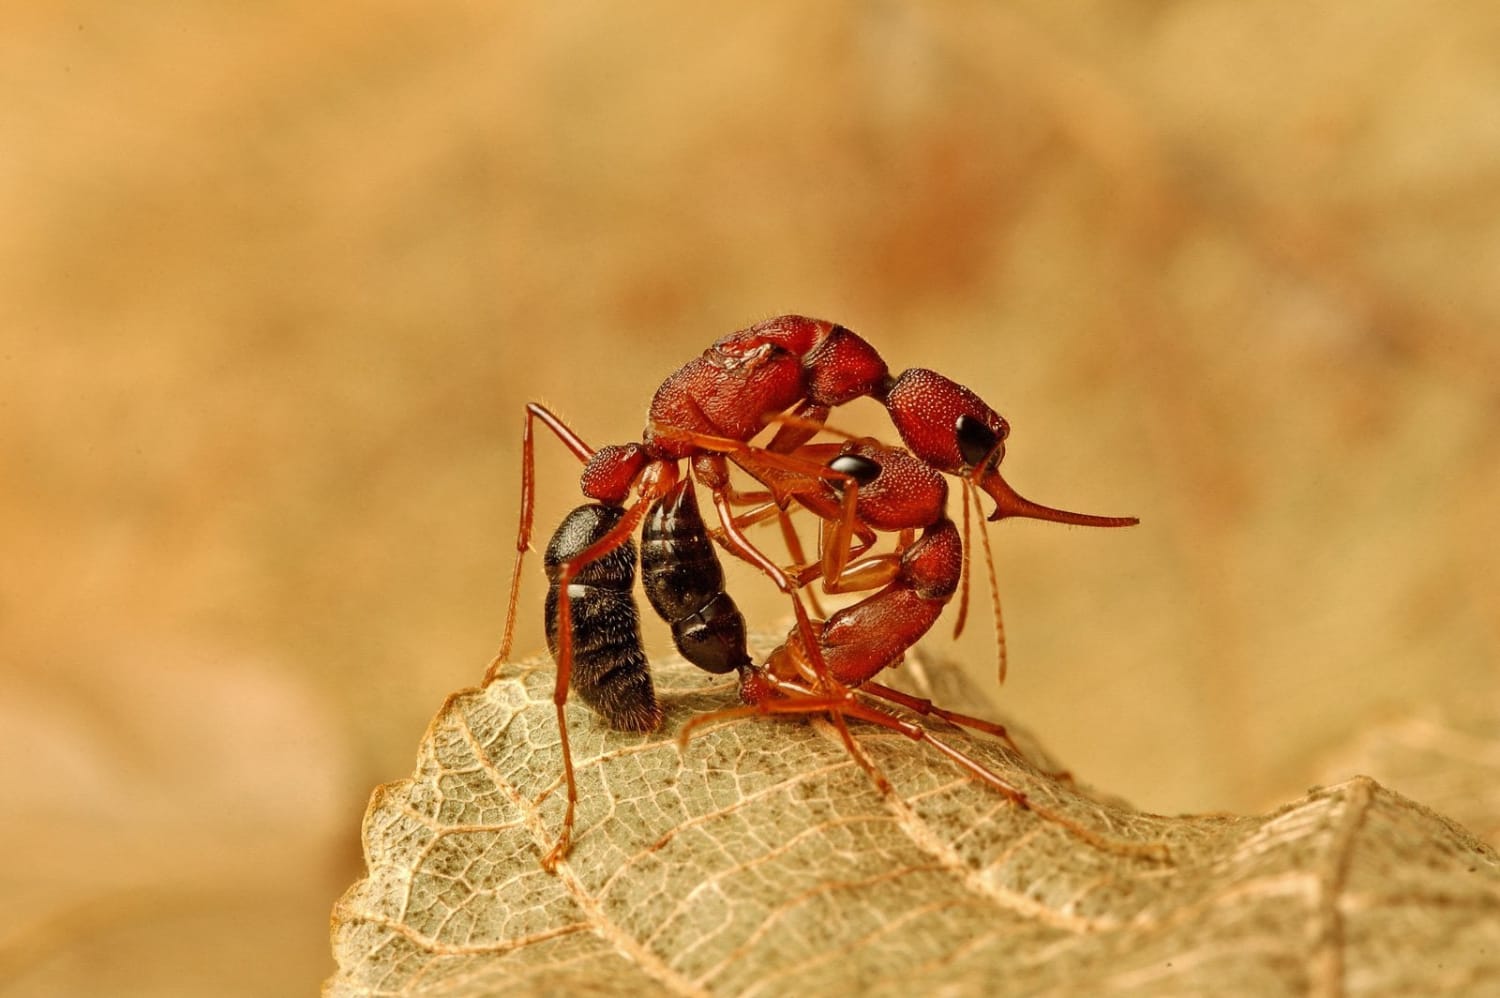 A Single Protein Can Switch Some Ants From a Worker Into a Queen